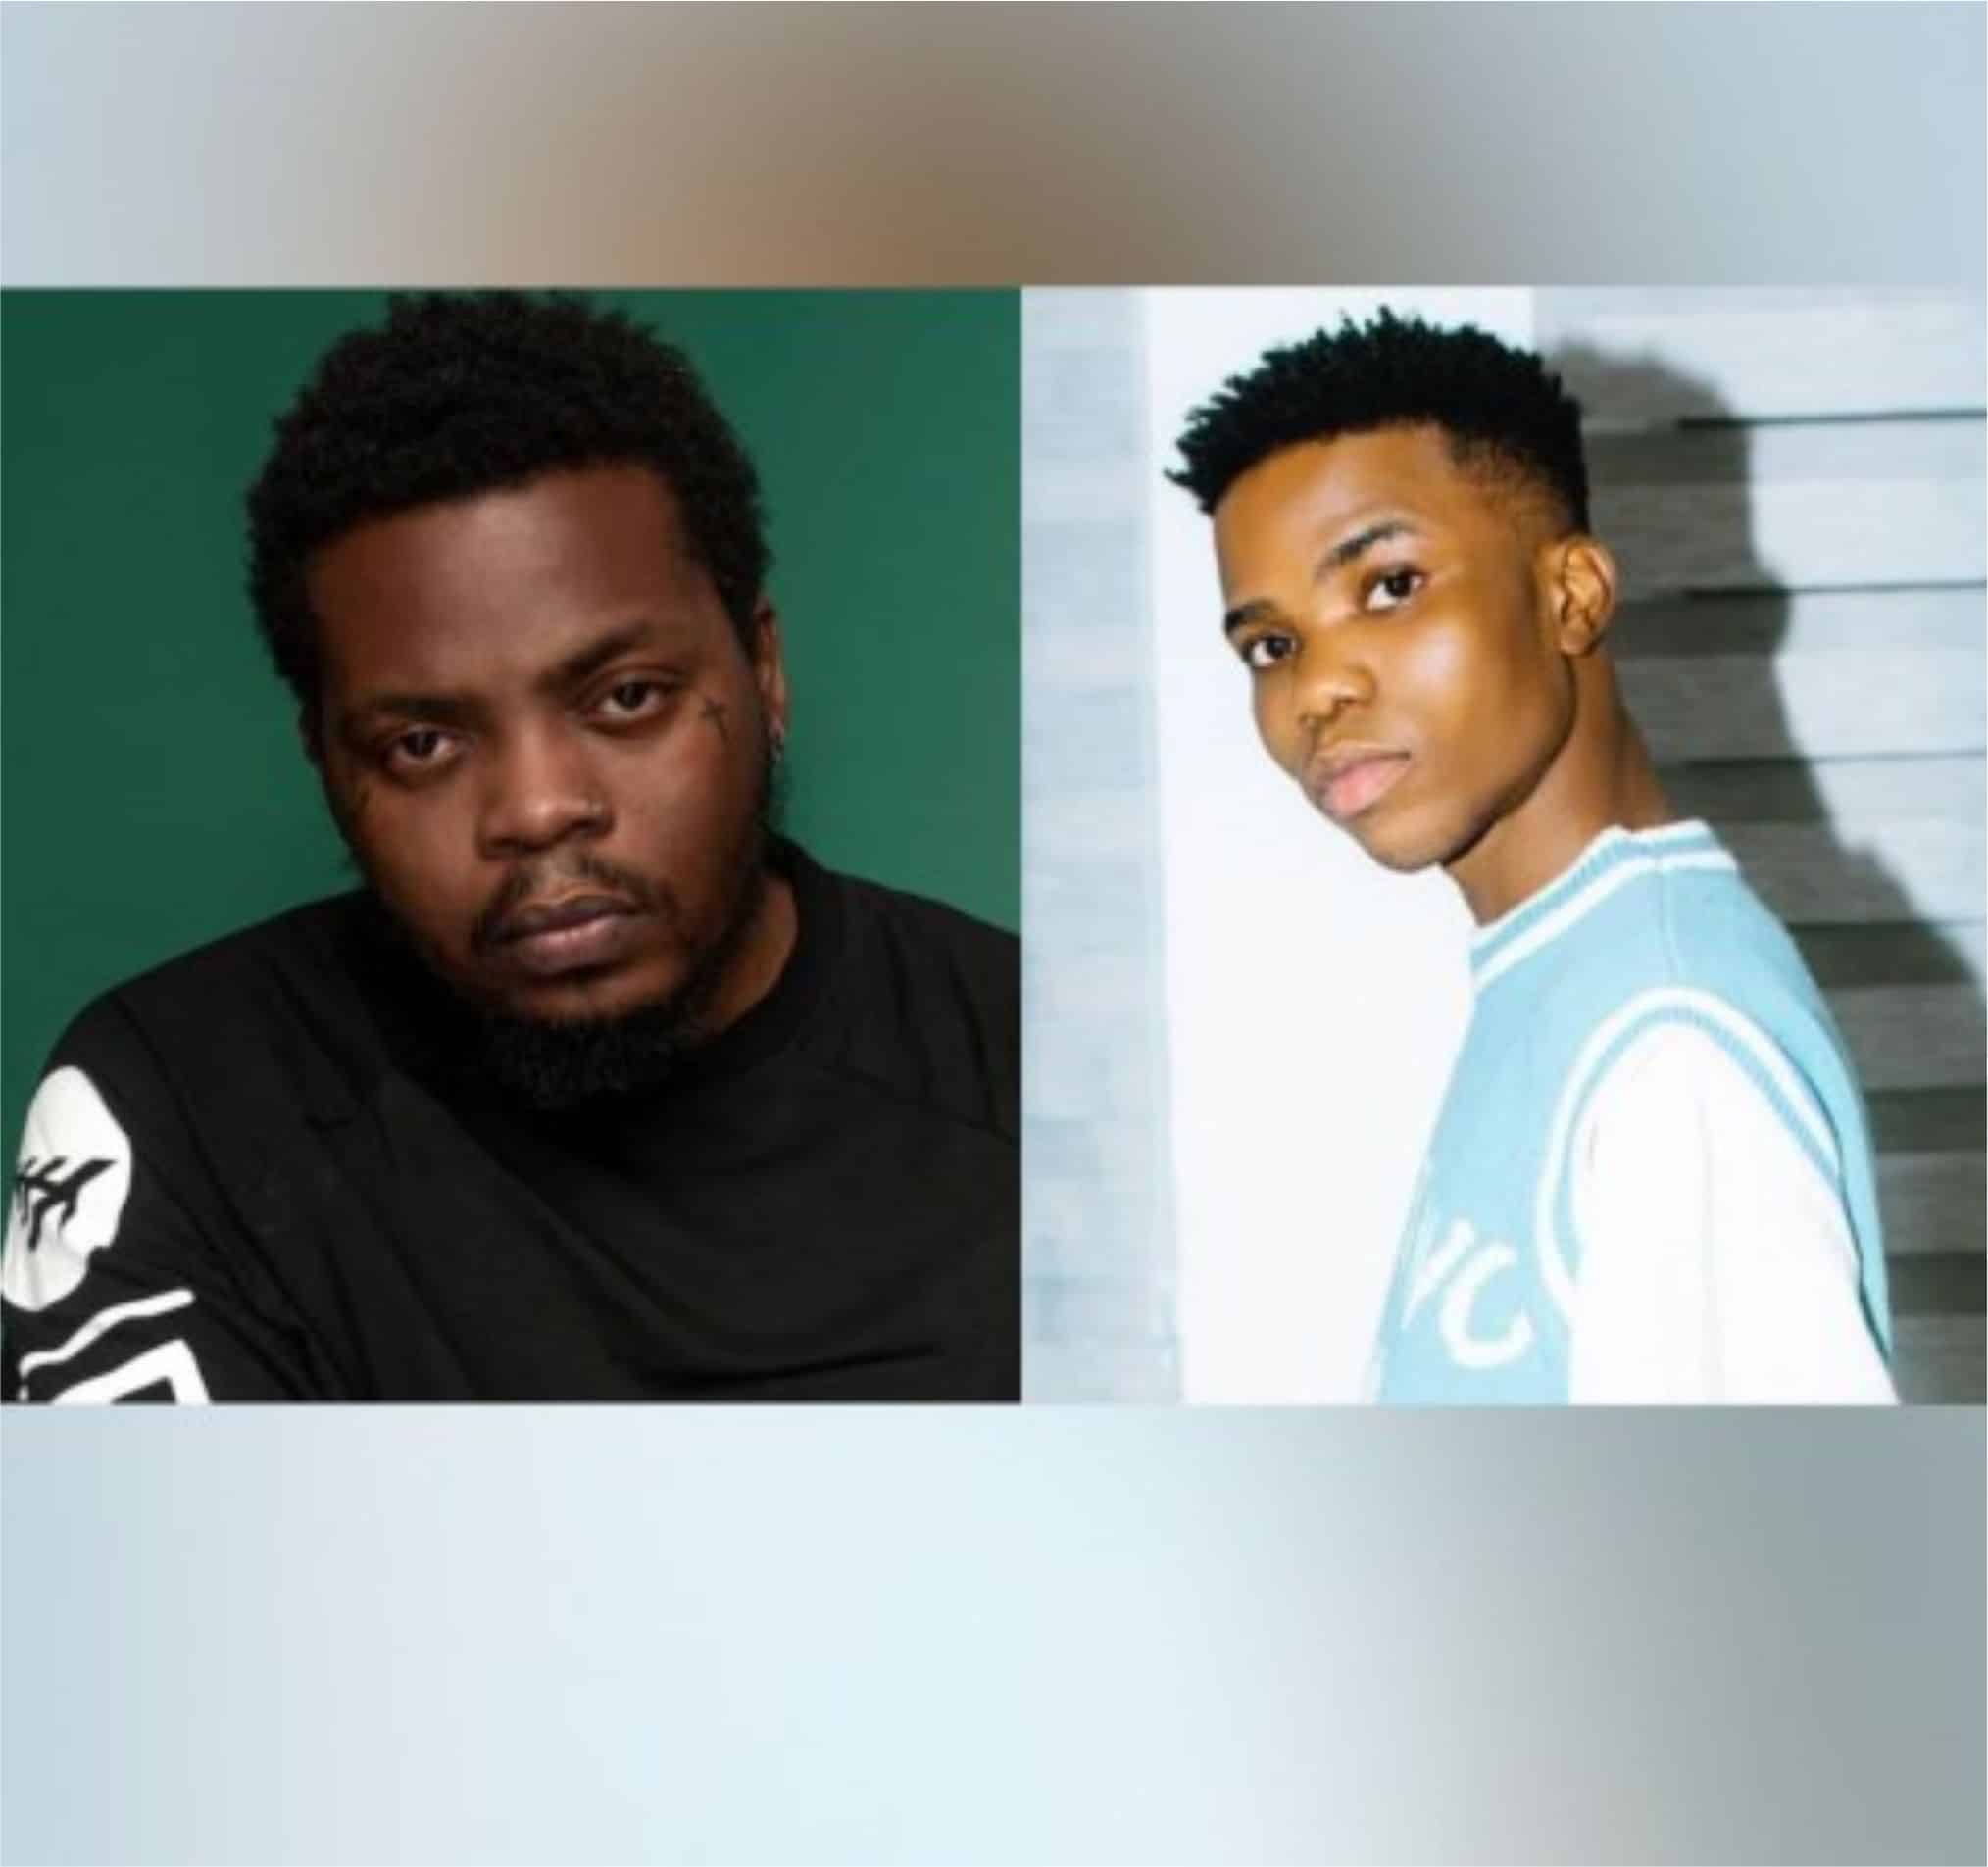 “My Friends Deceived Me, I Regret Leaving Olamide..” – Lyta